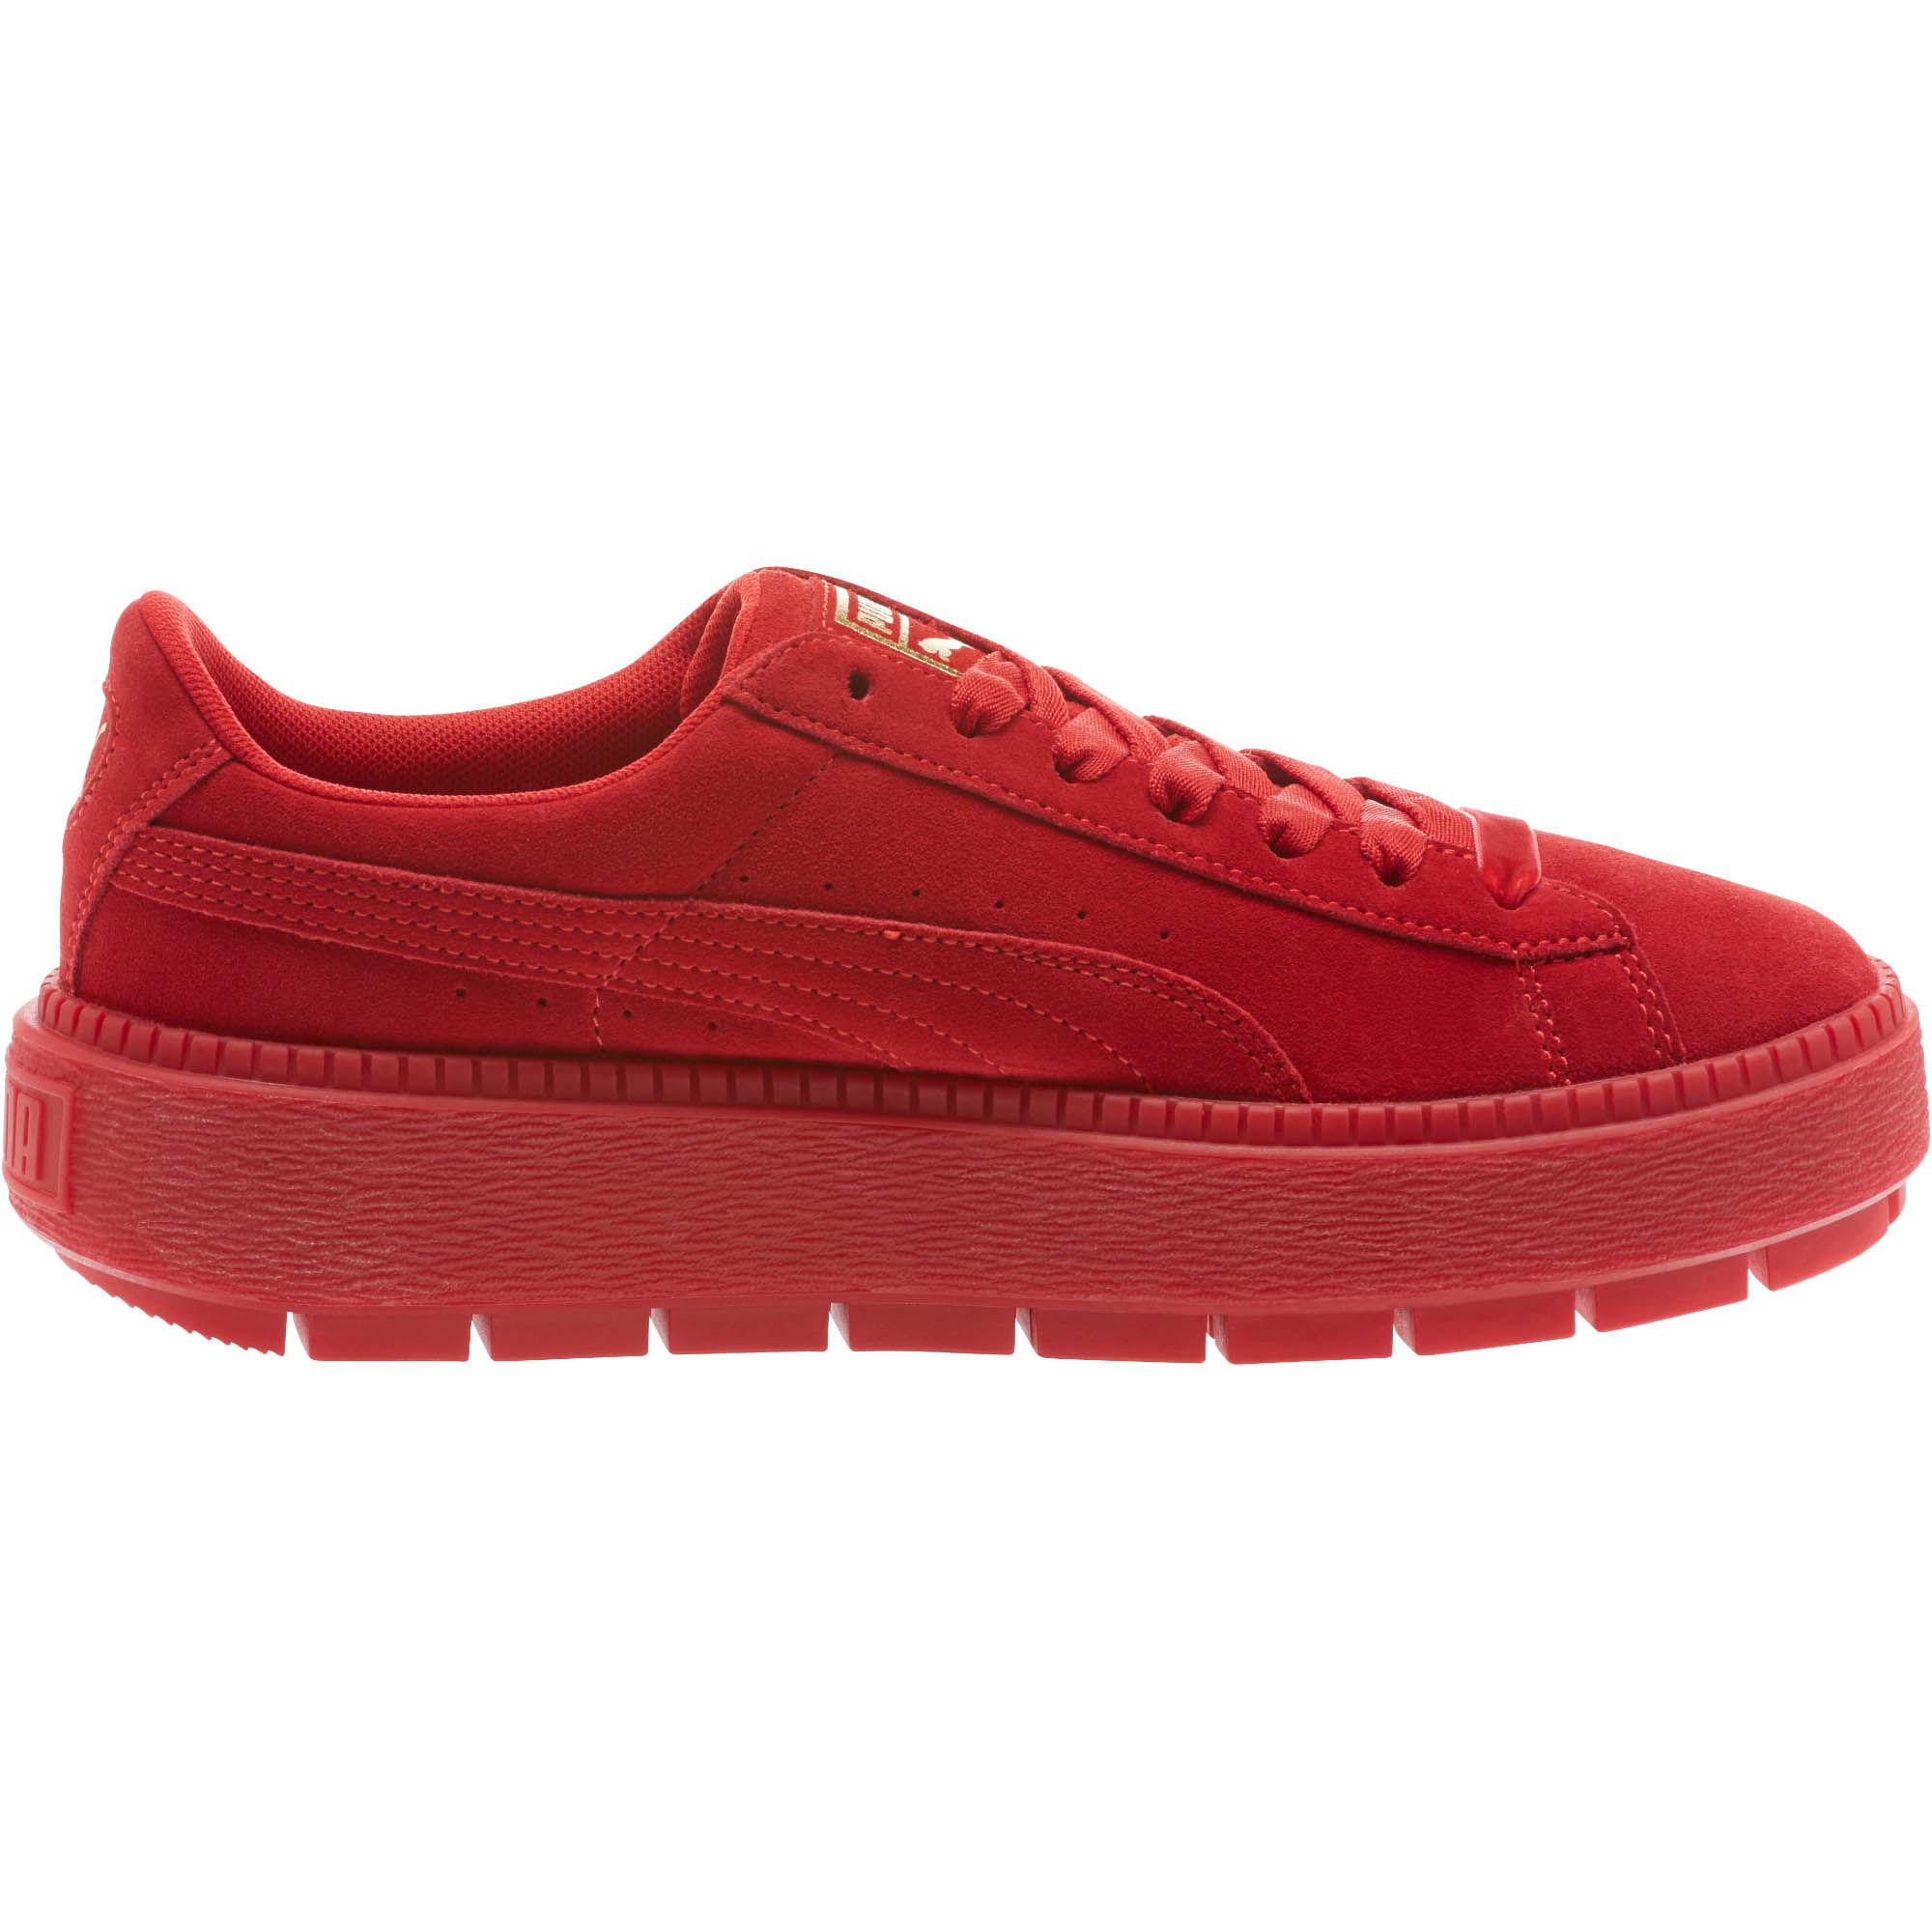 PUMA Suede Platform Trace Valentine's Day Women's Sneakers in Red - Lyst